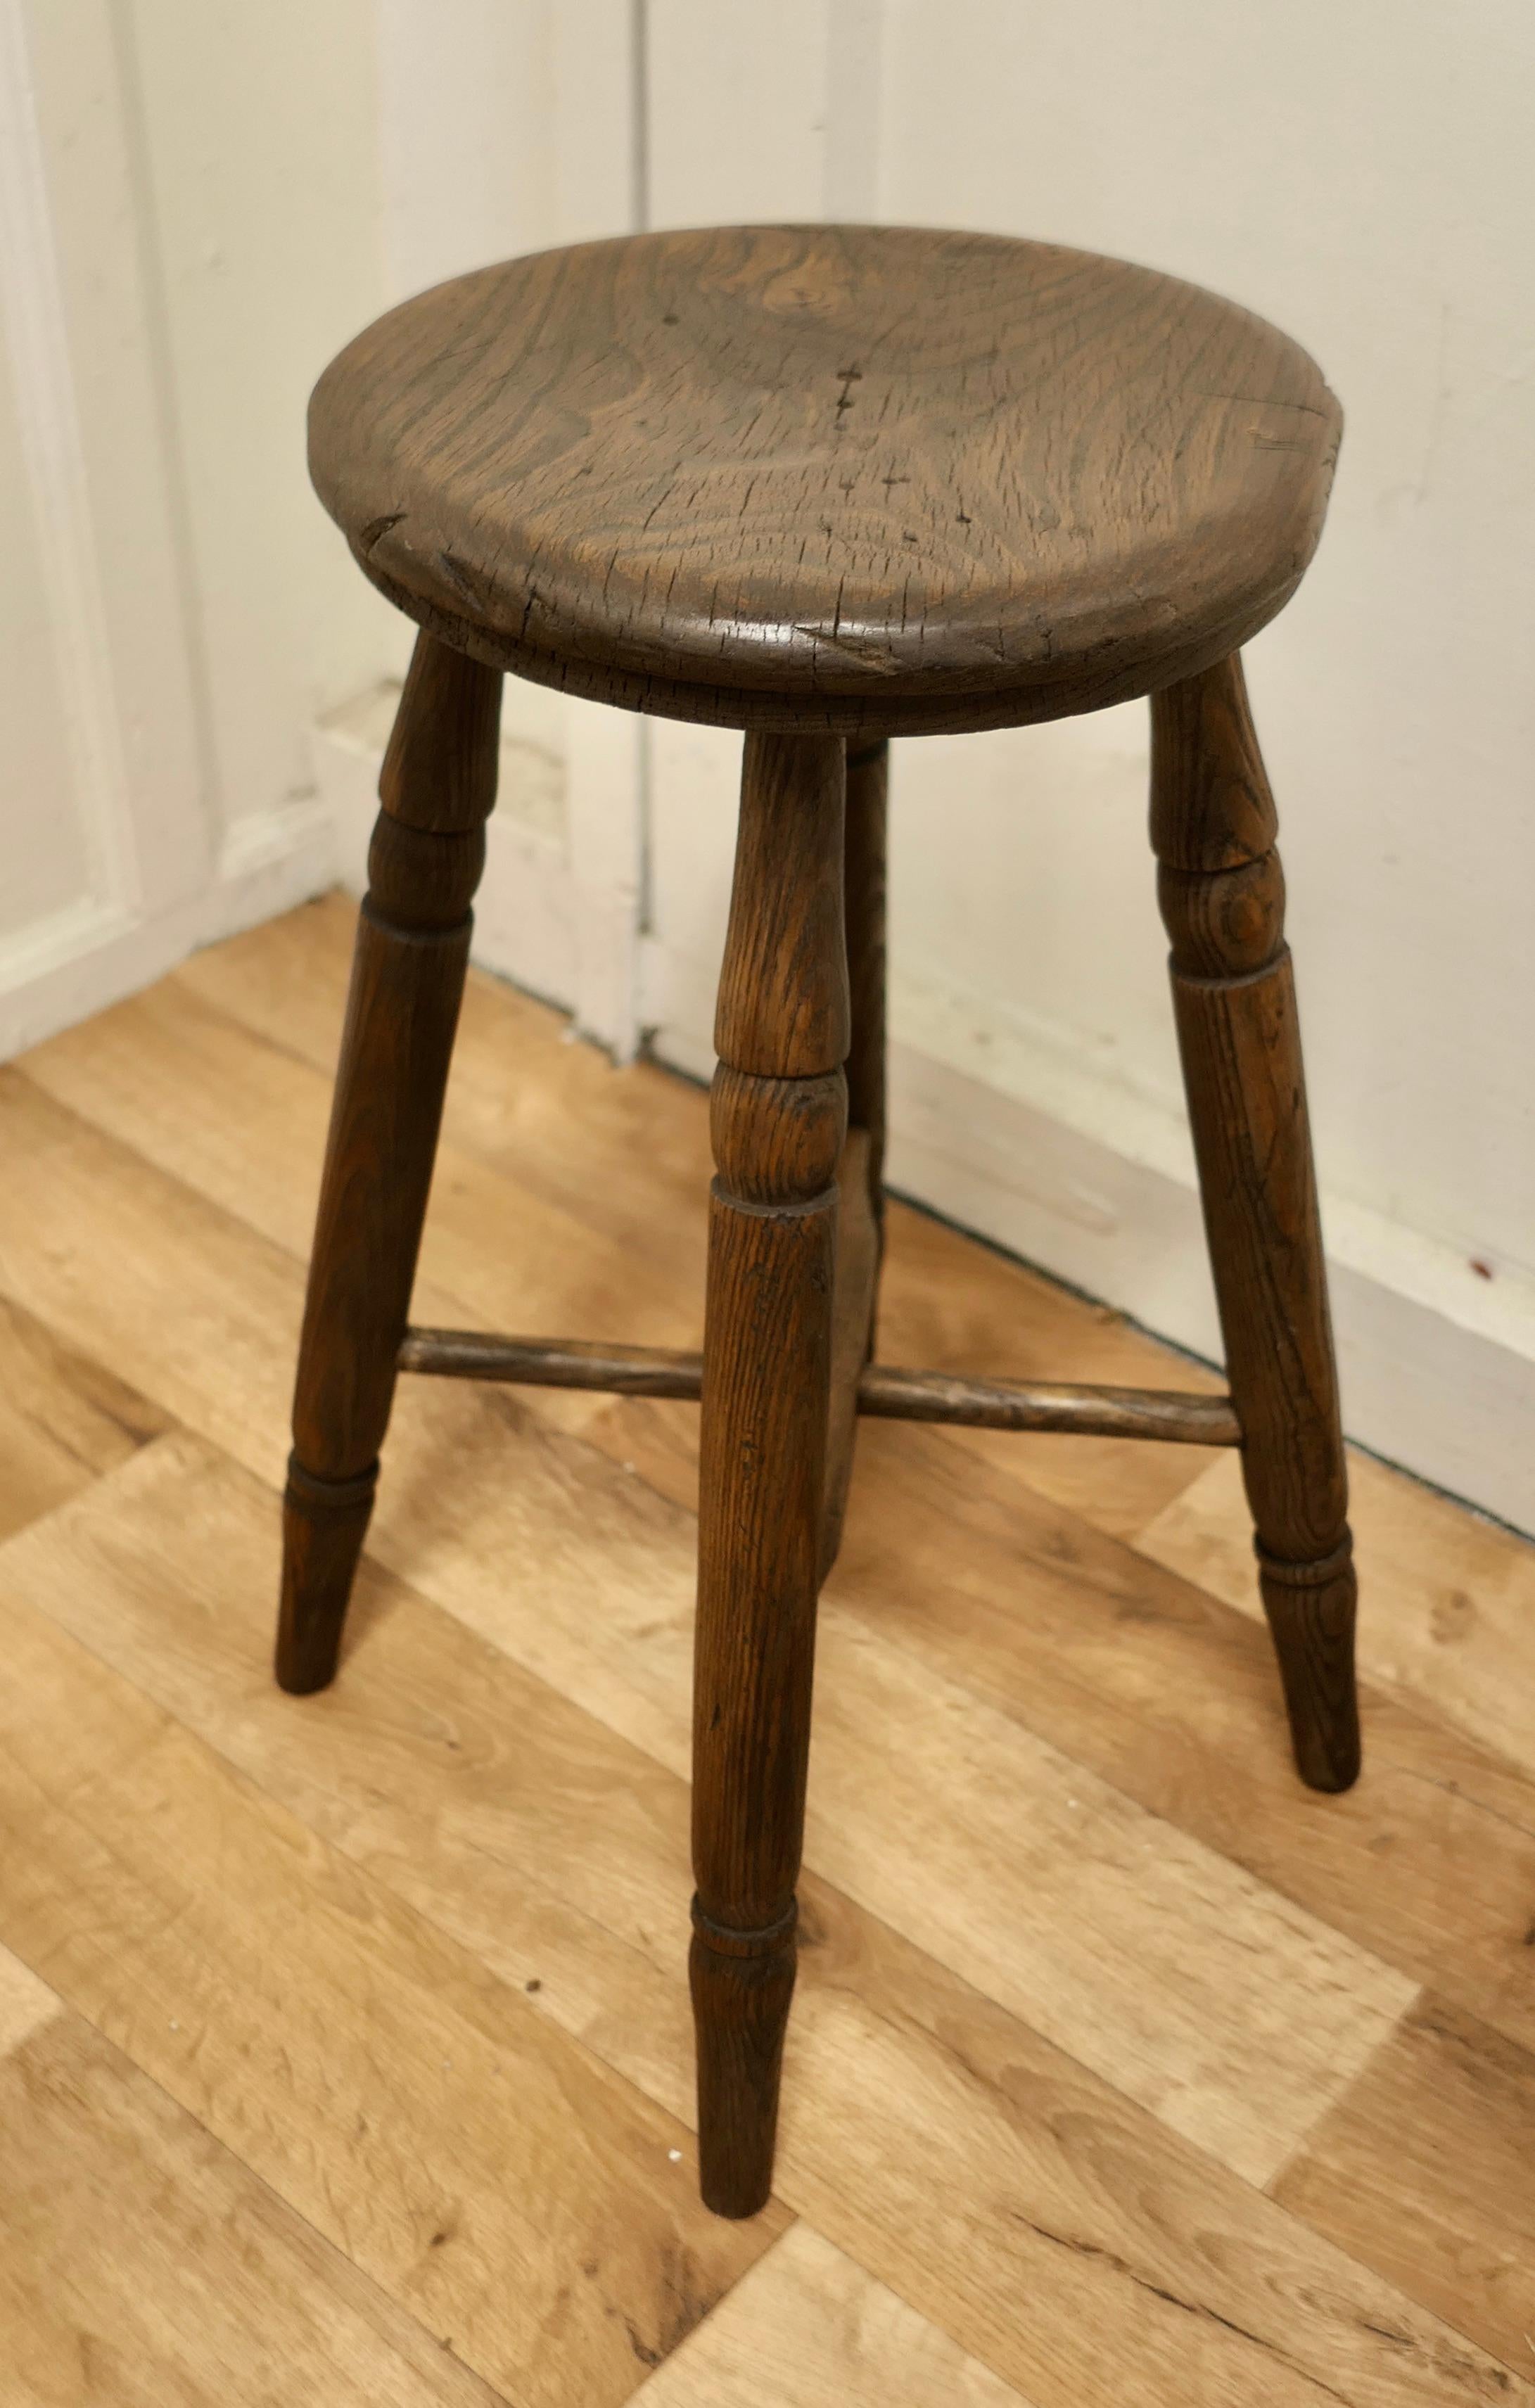 A pair of Victorian Ash and Elm Farmhouse Kitchen stools

A lovely country pair with a superb natural colour and a rustic patina, the 1.5” thick solid elm seats elm seats have a nice shape to the edge
The stools are good and sound, they are 12”